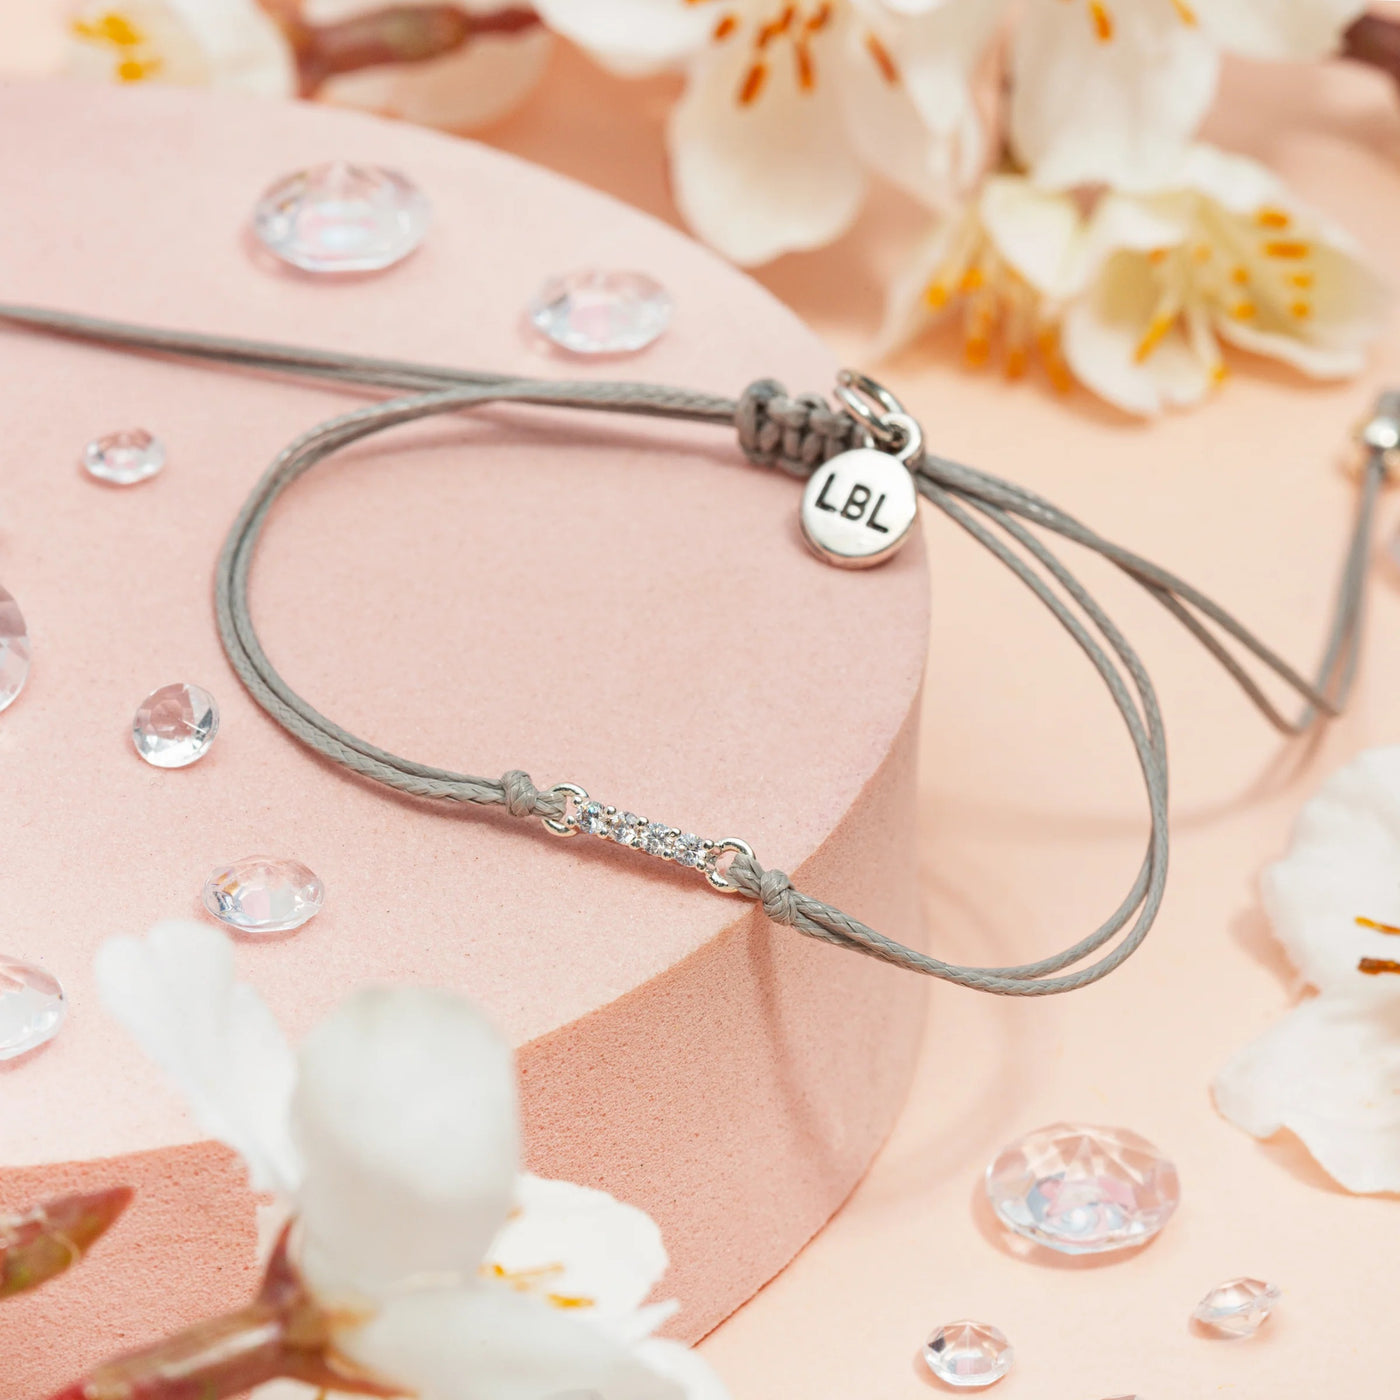 Letterbox Love Pave Cord Bracelet - When Robins Appear, Loved Ones Are Near